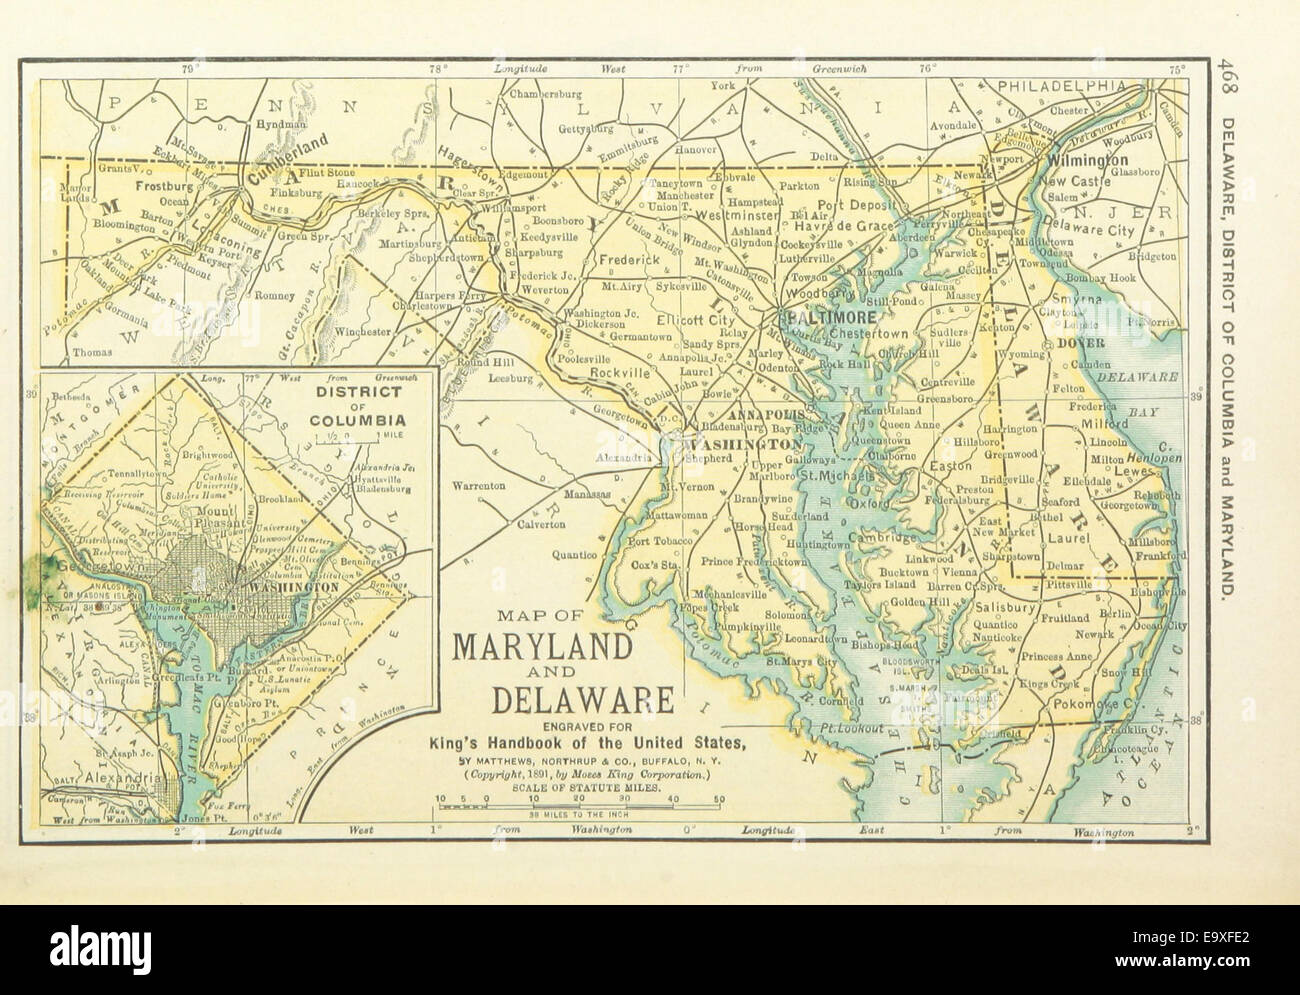 US-MAPS(1891) p470 - MAP OF MARYLAND, DELAWARE AND DISTRICT OF COLUMBIA Stock Photo